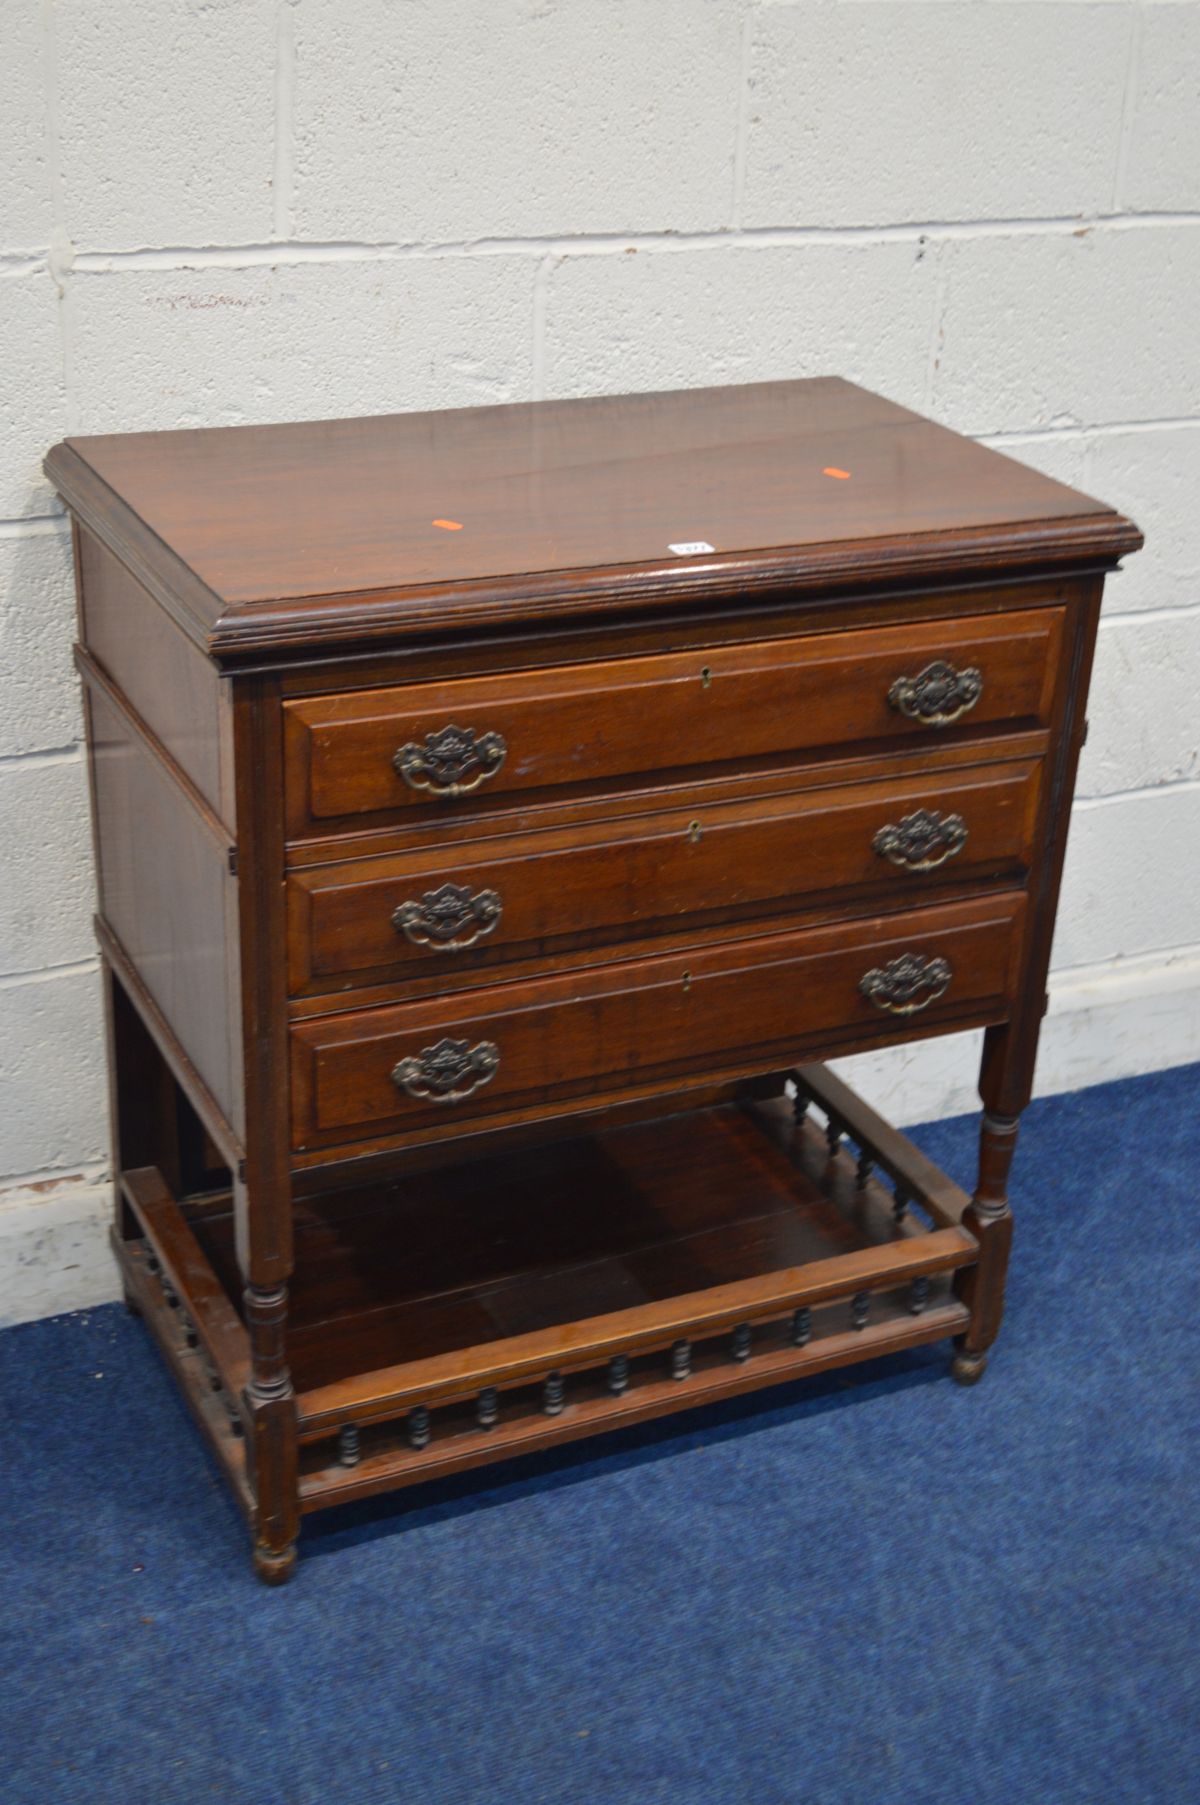 AN EDWARDIAN MAHOGANY SECRETAIRE CHEST OF TWO DRAWERS, above a galleried undershelf, width 82cm x